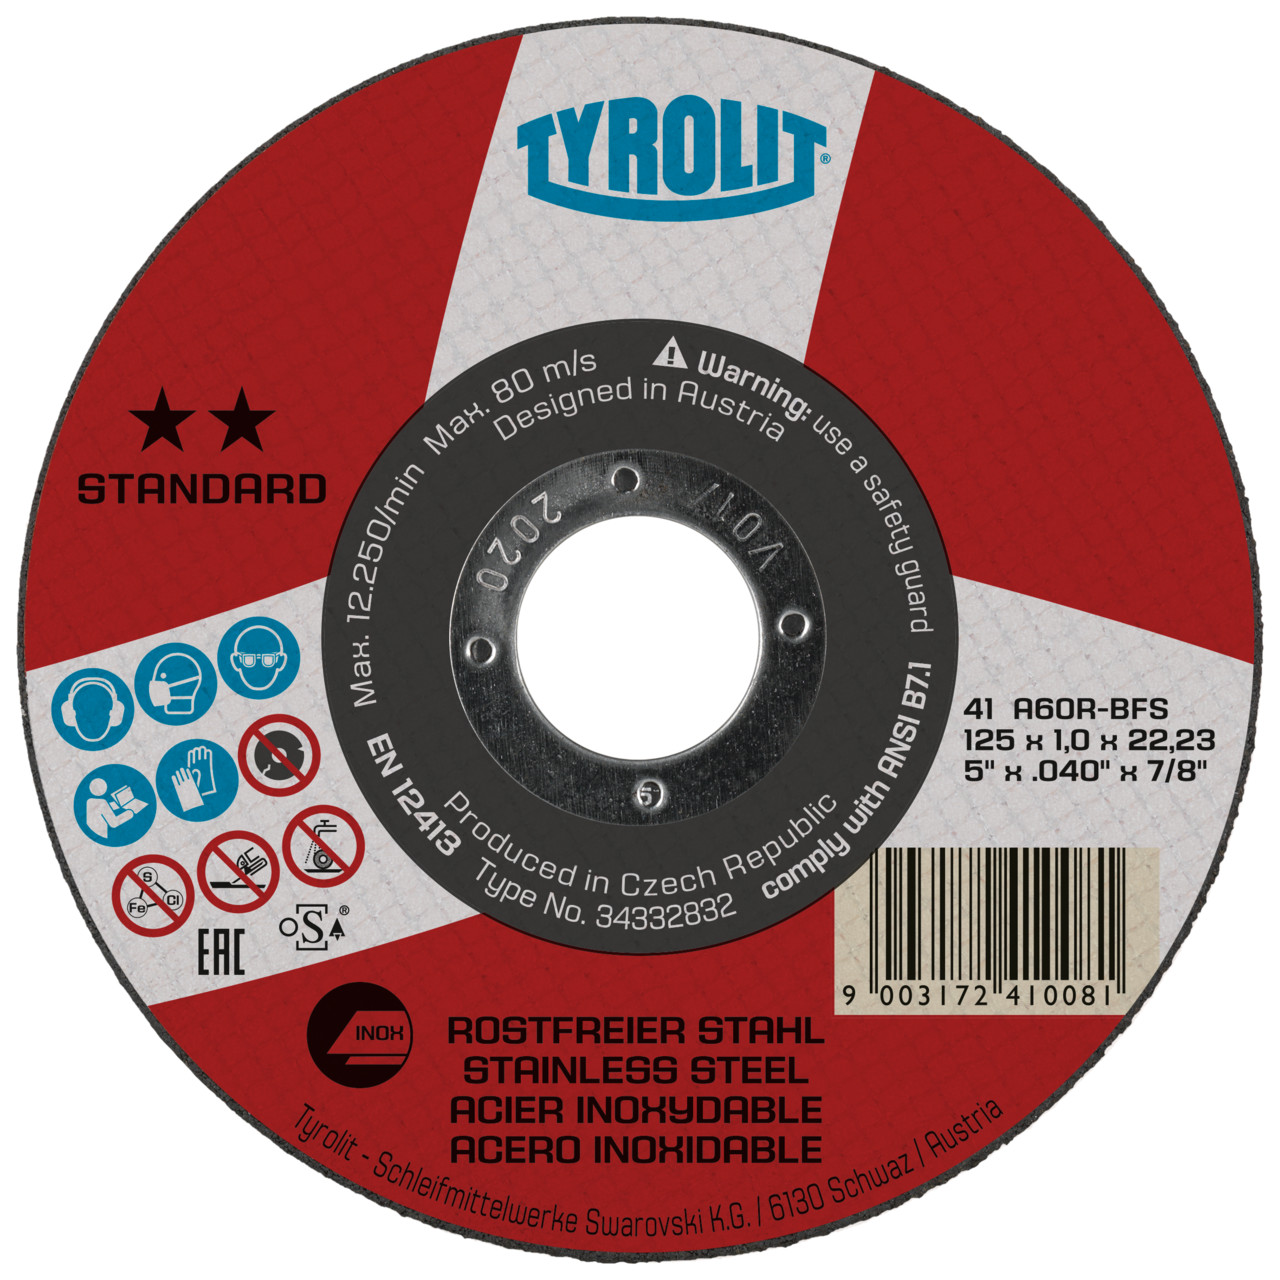 Tyrolit Cutting discs DxDxH 125x2.0x22.23 For stainless steel, shape: 41 - straight version, Art. 408496